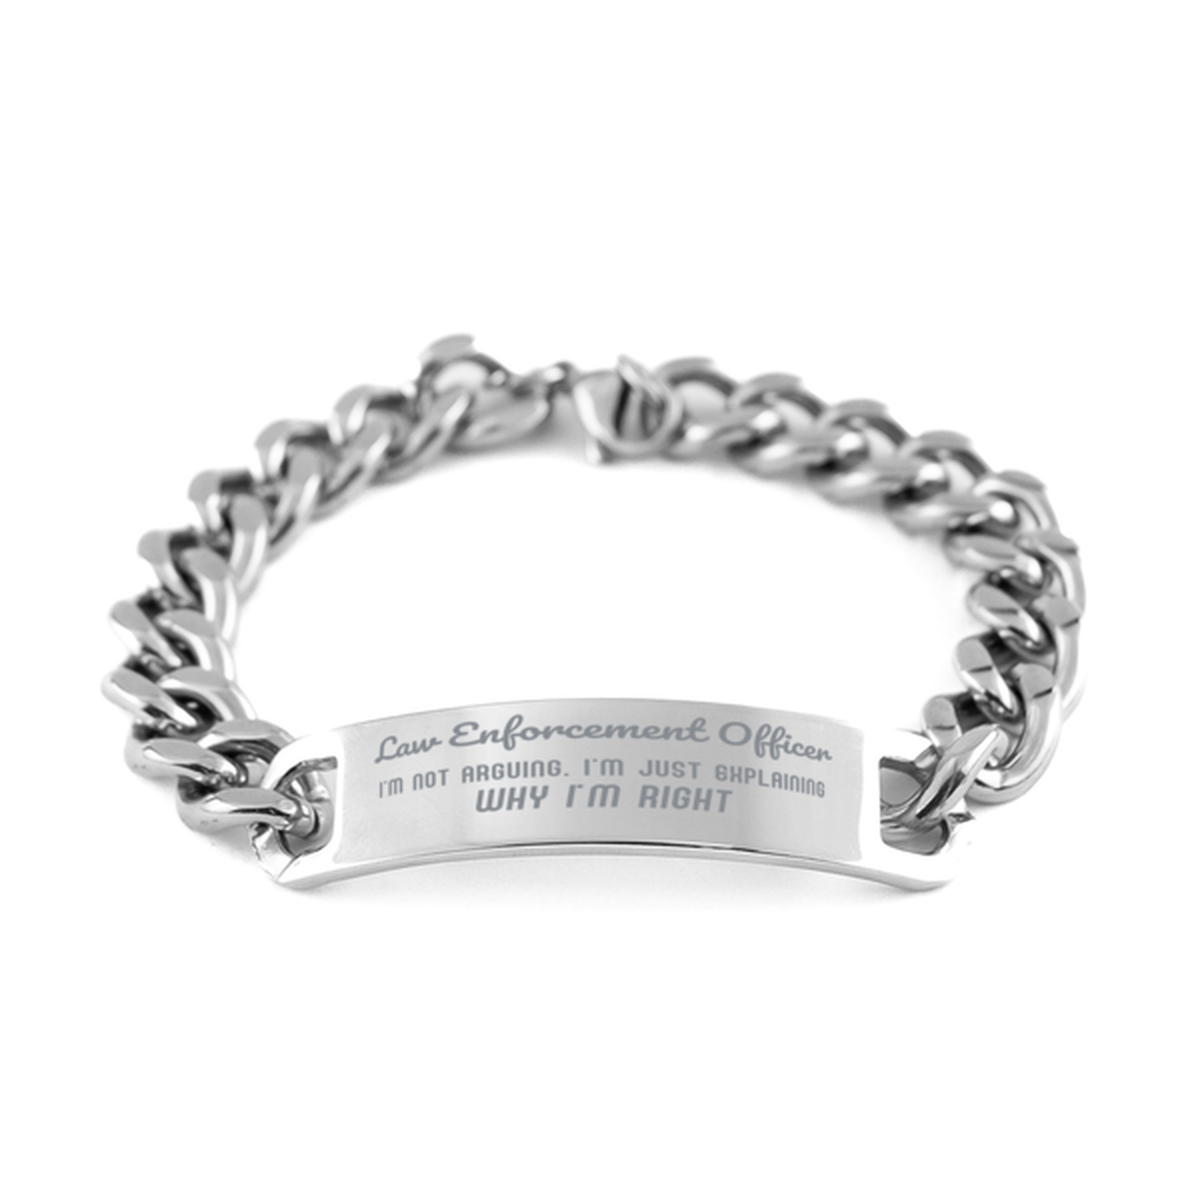 Law Enforcement Officer I'm not Arguing. I'm Just Explaining Why I'm RIGHT Cuban Chain Stainless Steel Bracelet, Graduation Birthday Christmas Law Enforcement Officer Gifts For Law Enforcement Officer Funny Saying Quote Present for Men Women Coworker